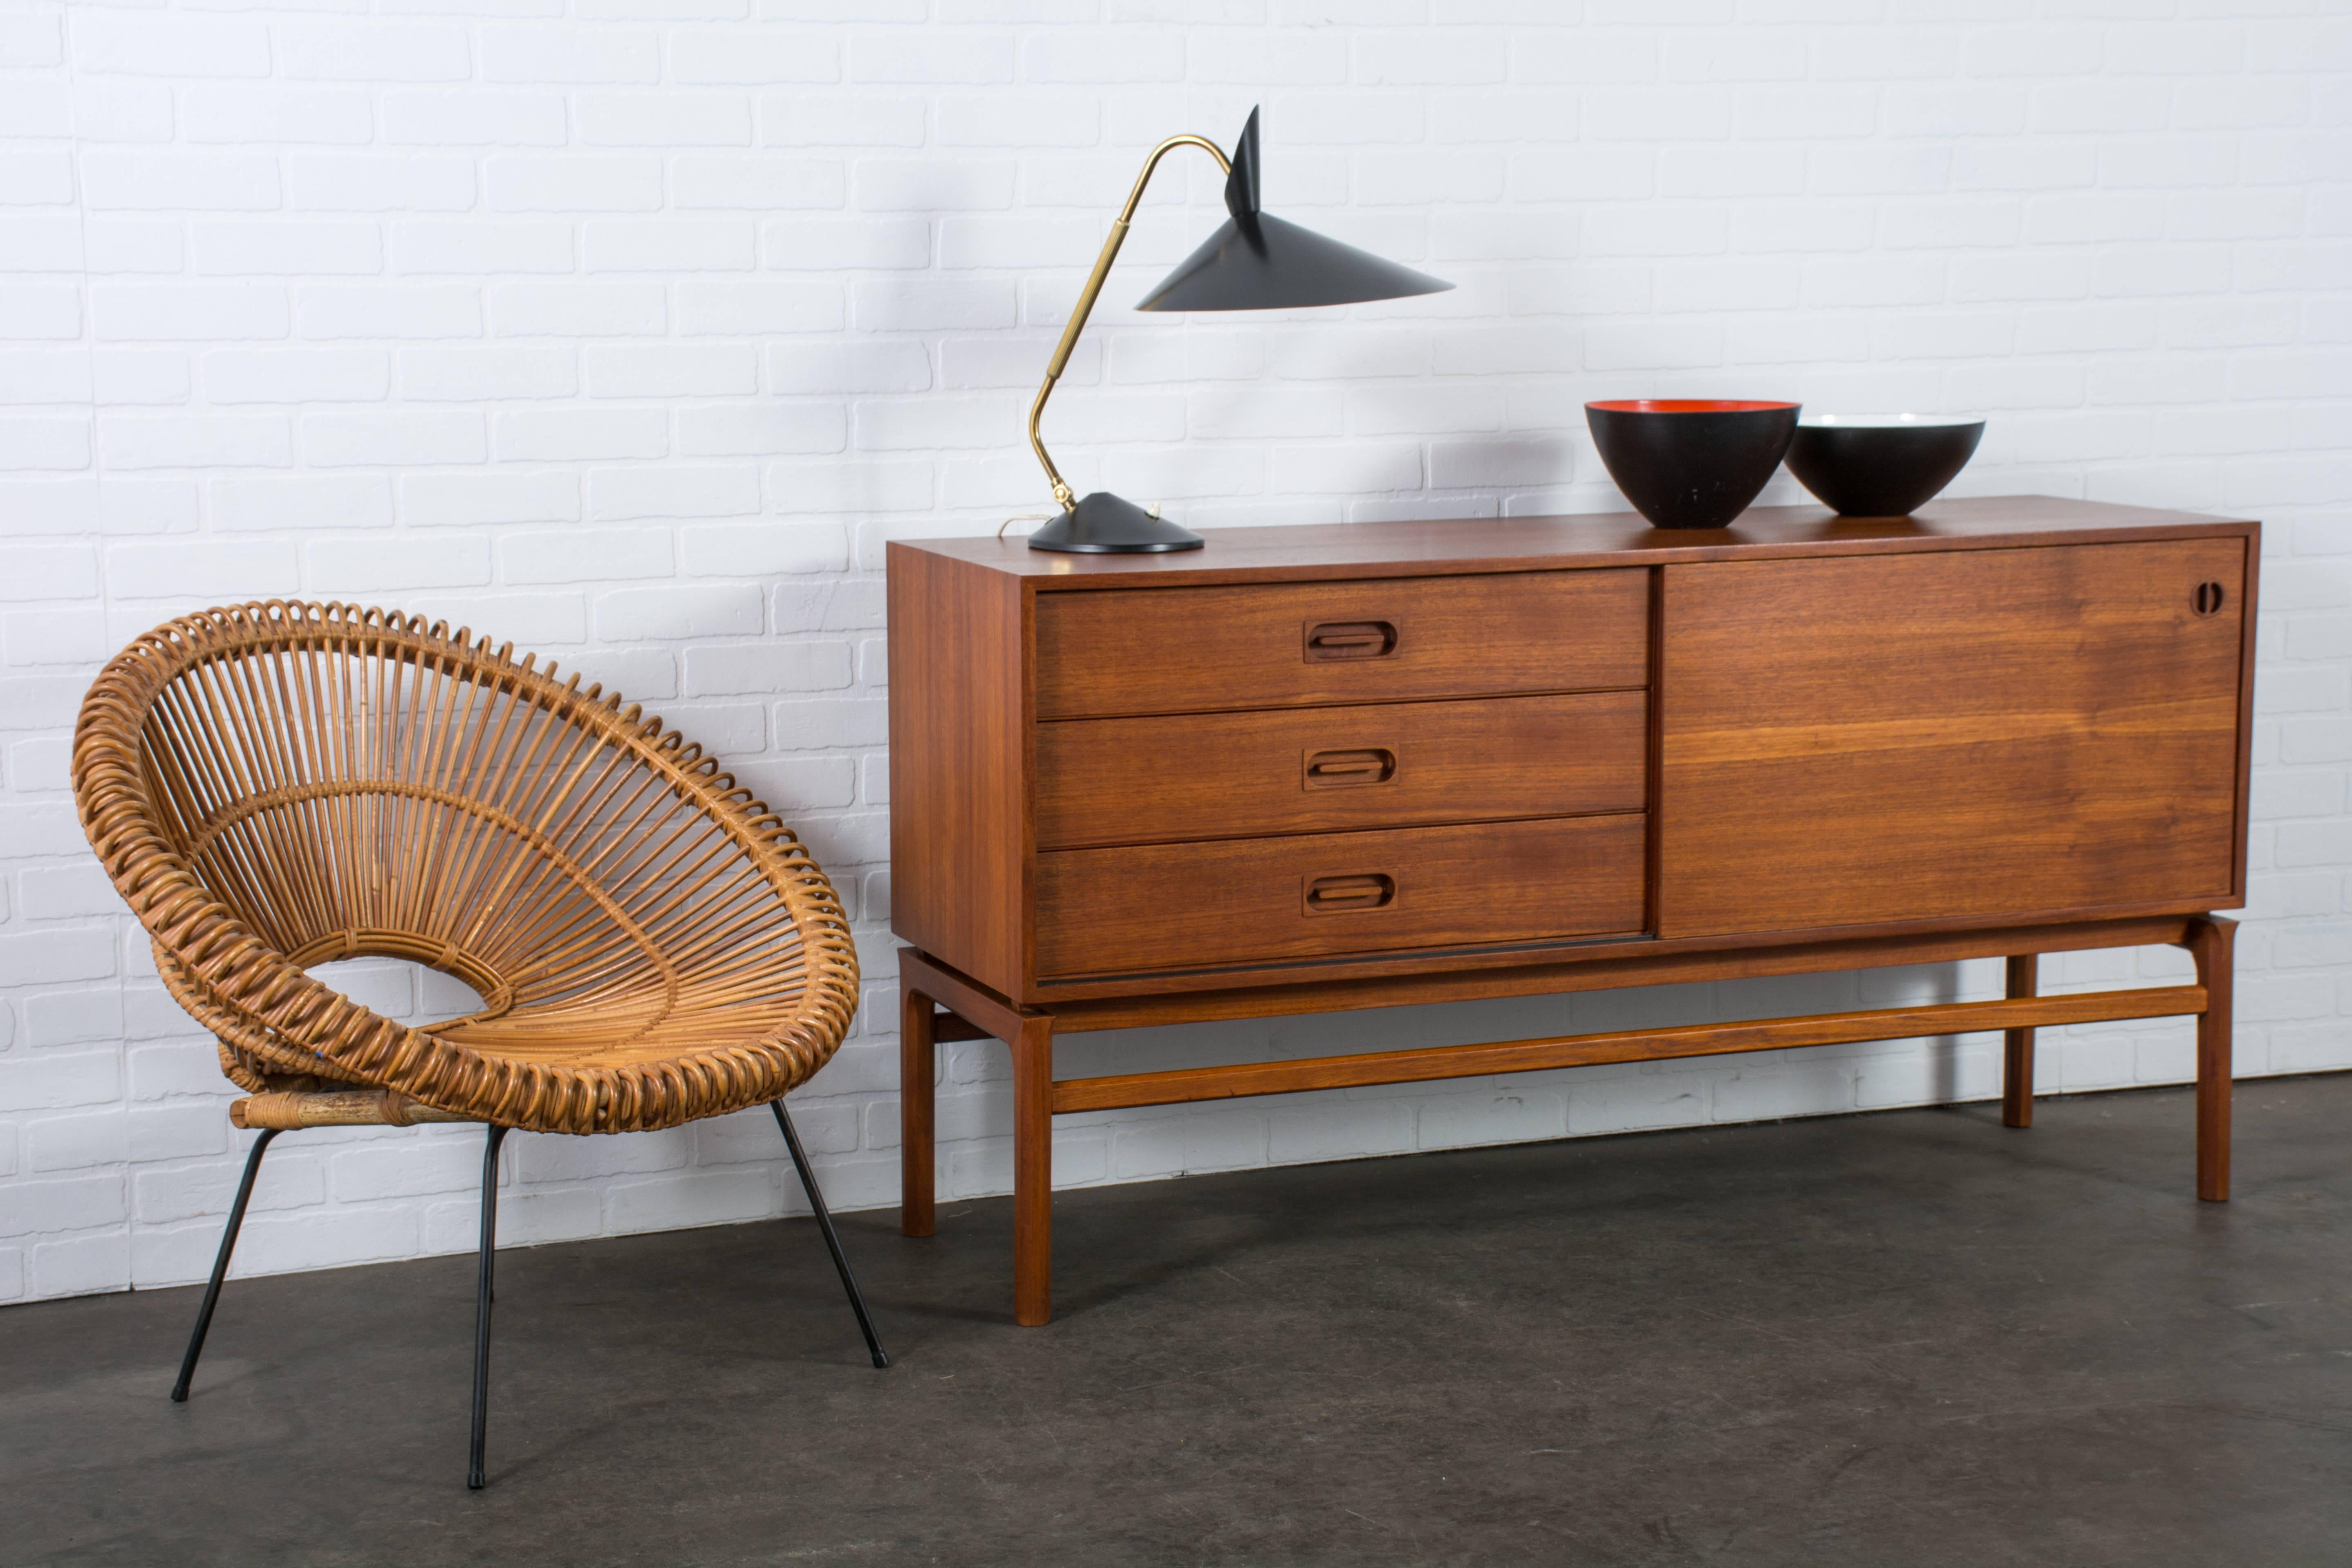 This vintage Mid-Century teak sideboard features three drawers on the left and a sliding door on the right that conceals one adjustable shelf. Marked Borchorst & Lindhard, Made in Denmark, 1958.